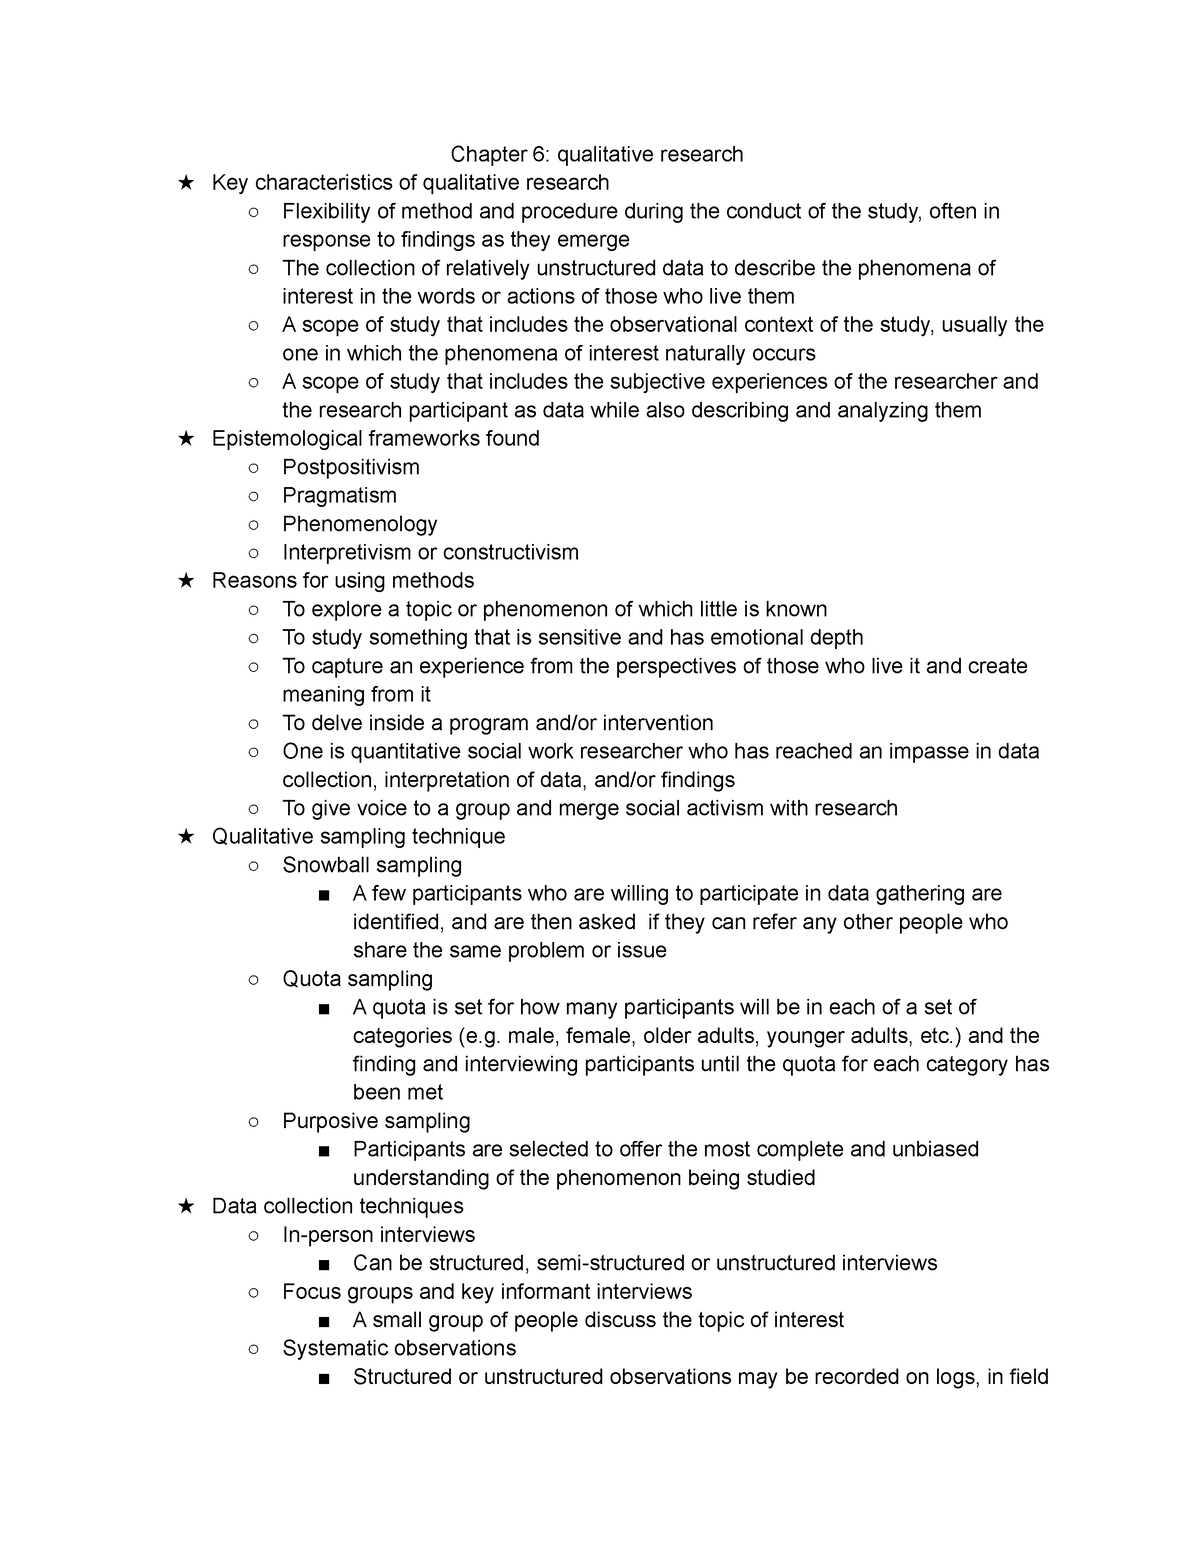 Chapter 6 qualitative research - Chapter 6: qualitative research ★ Key ...